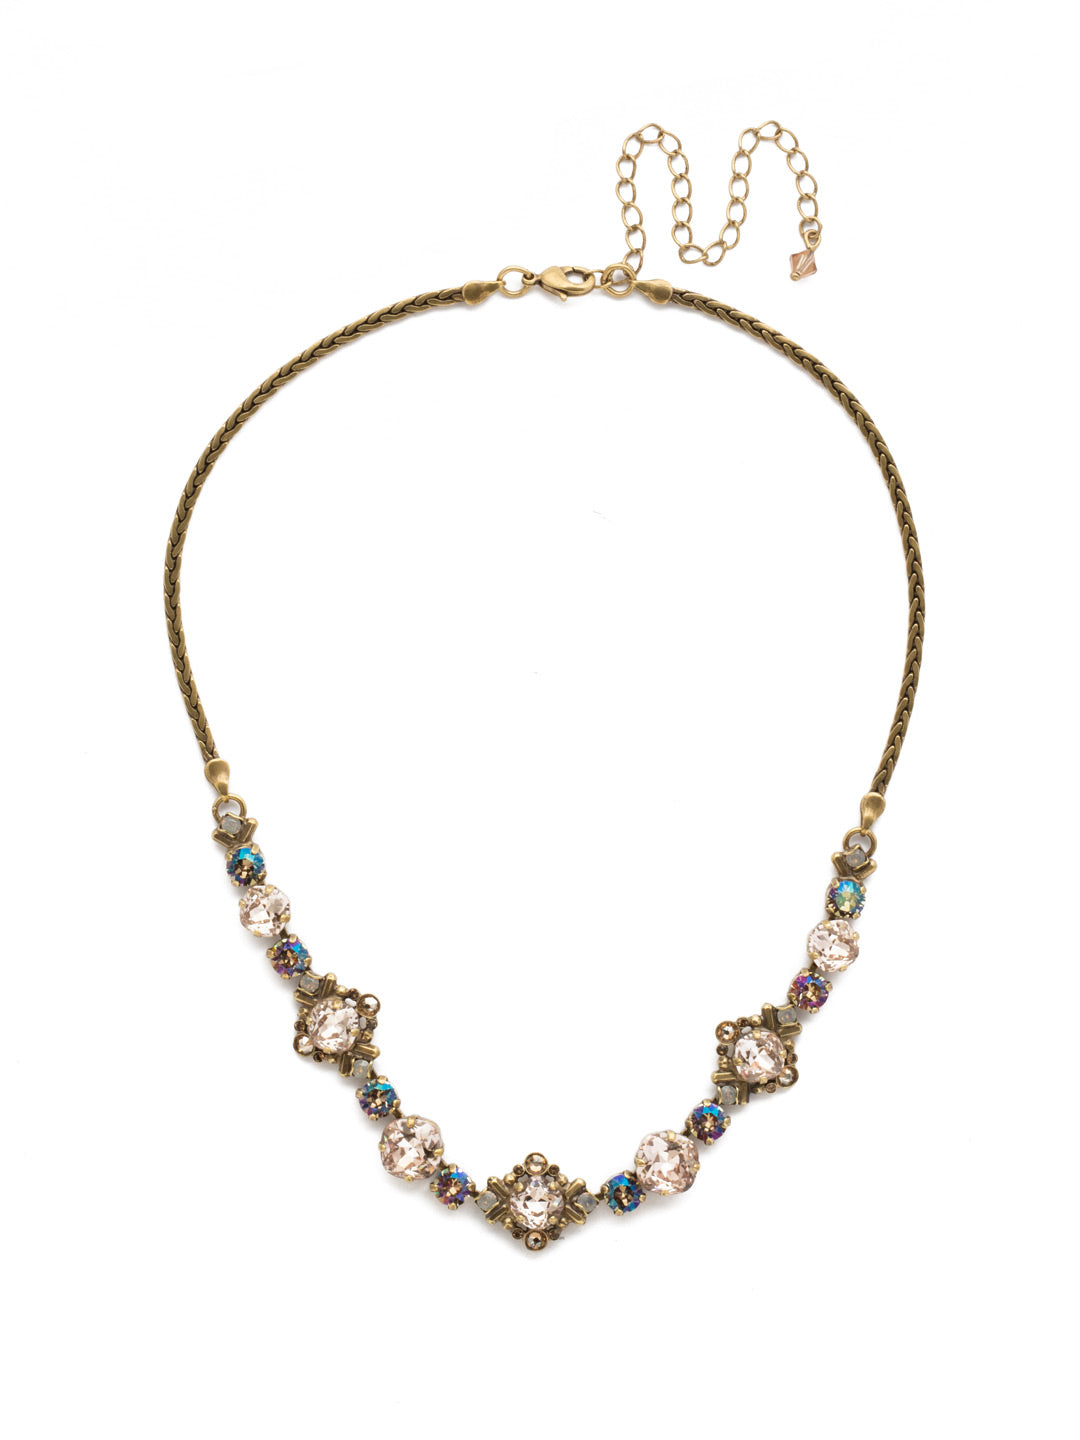 Stonecrop Tennis Necklace - NDX4AGSTN - A cushion cut stone in a detailed metal setting alternates with single round and cushion cut crystals in this dazzling half line necklace. From Sorrelli's Sandstone collection in our Antique Gold-tone finish.